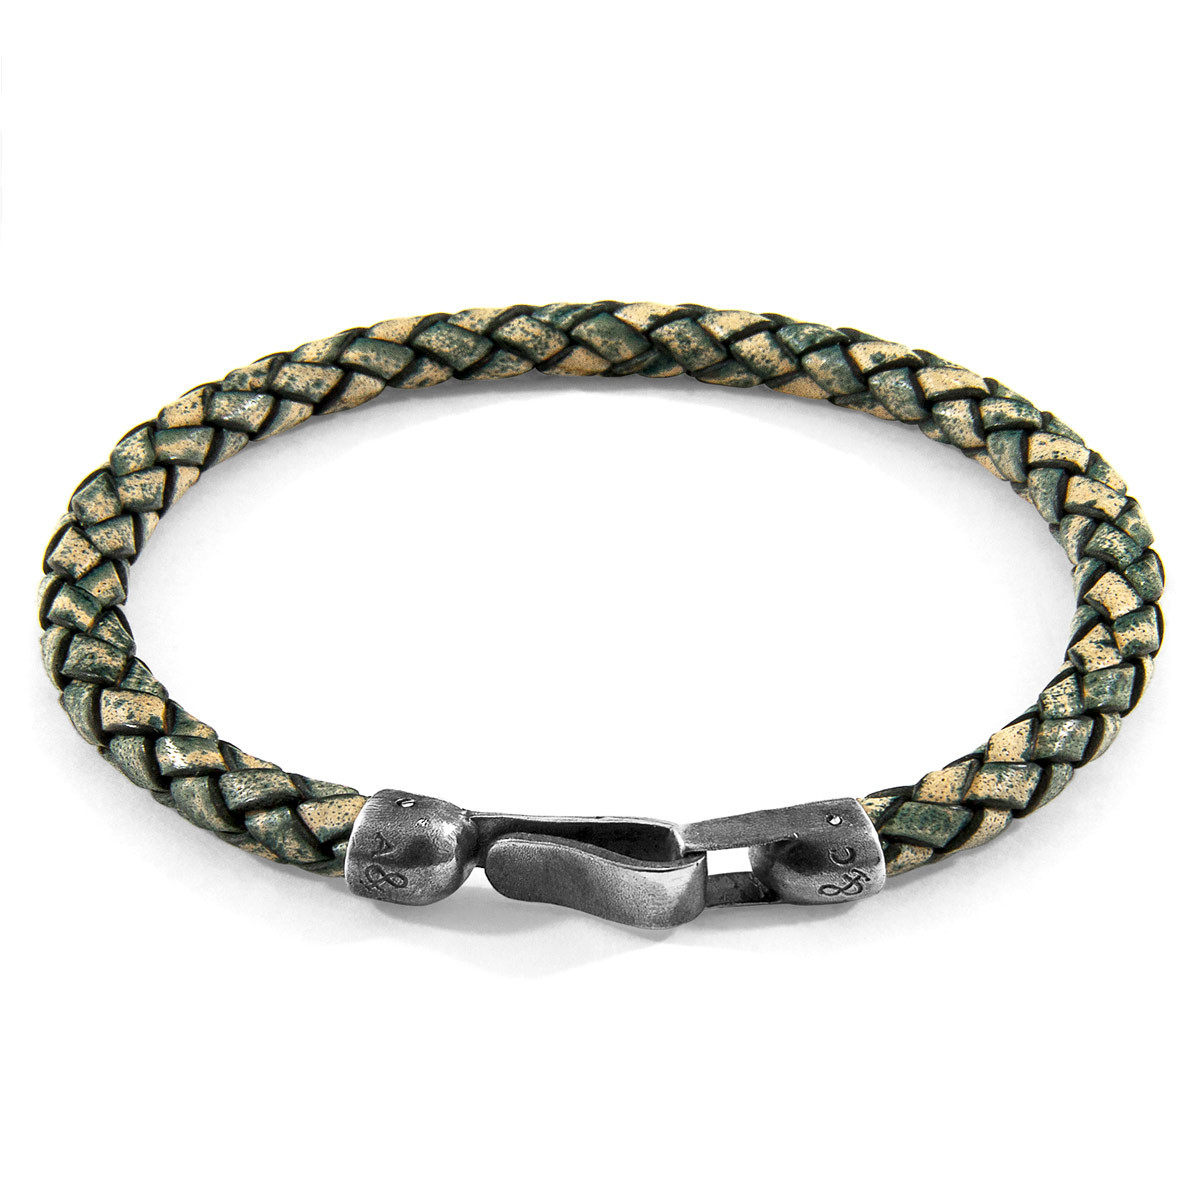 Anchor & Crew Petrol Green Skye Silver and Braided Leather Bracelet